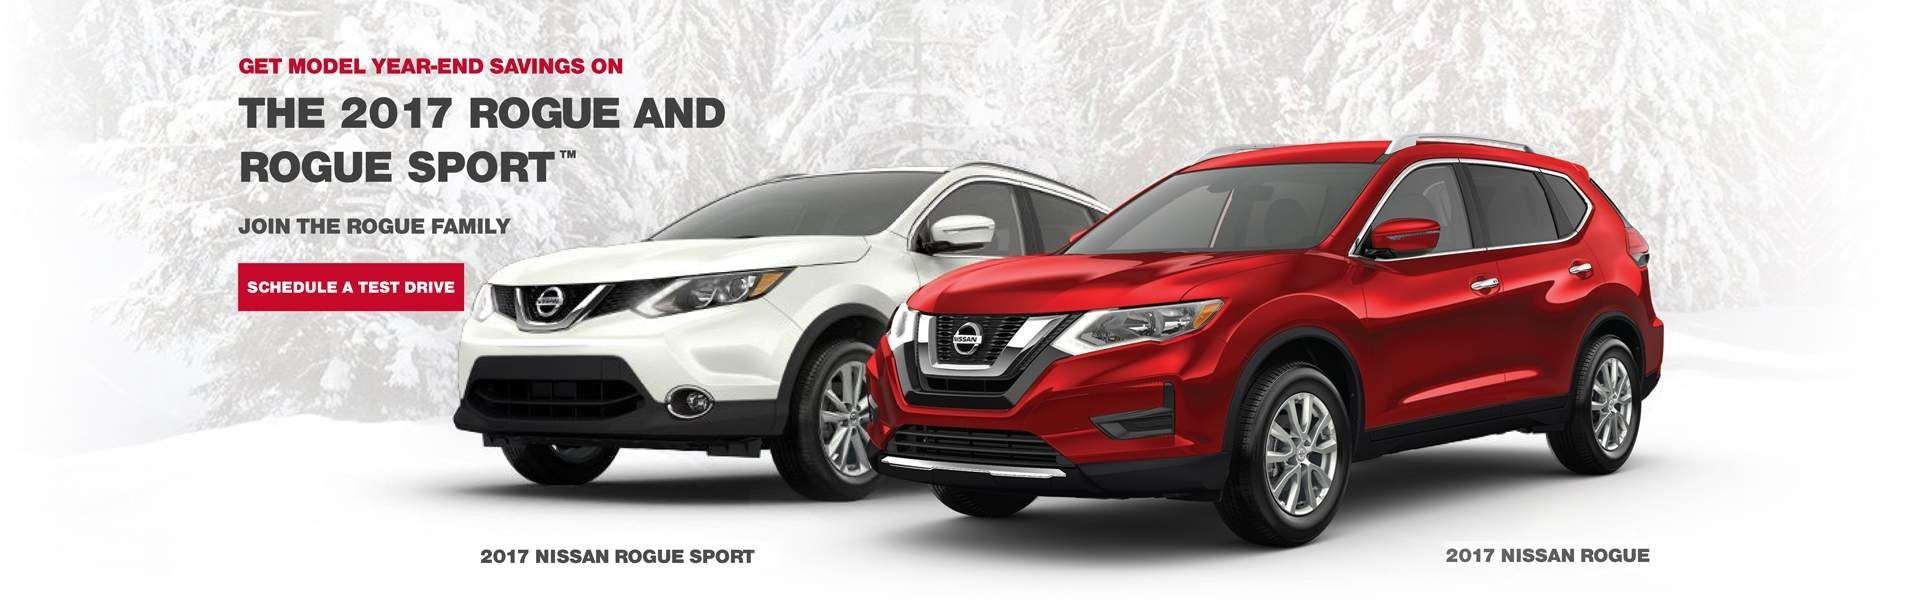 Glendale Heights, IL shoppers are invited to schedule a test drive on outgoing 2017 Nissan Rogue and 2017 Nissan Rogue Sport models.